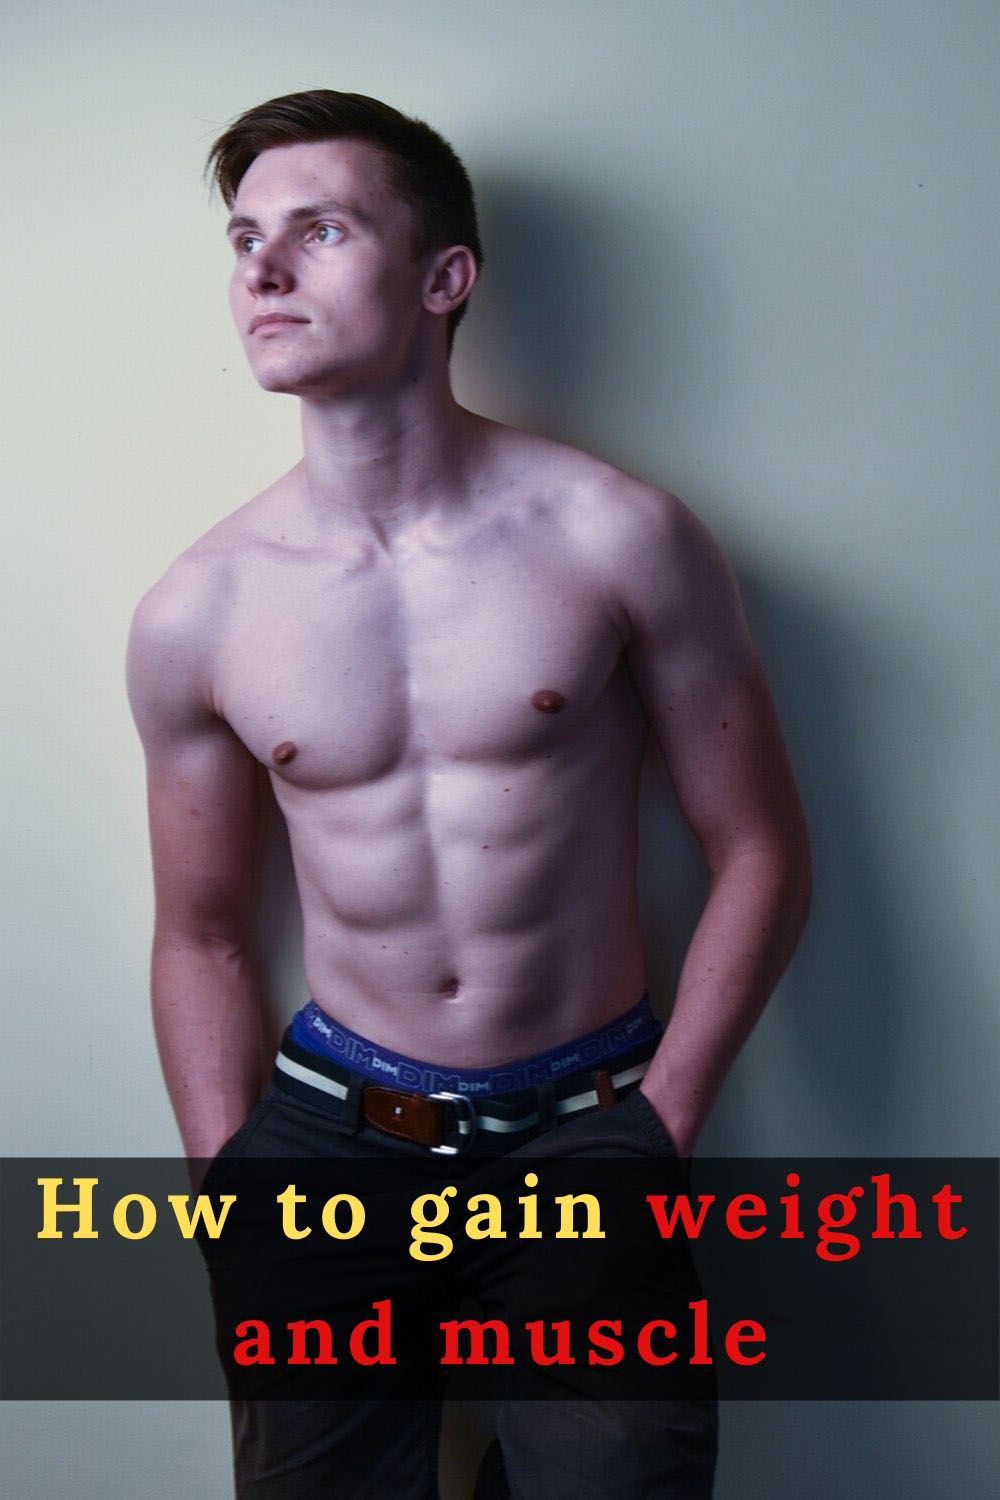 How to gain weight and muscle